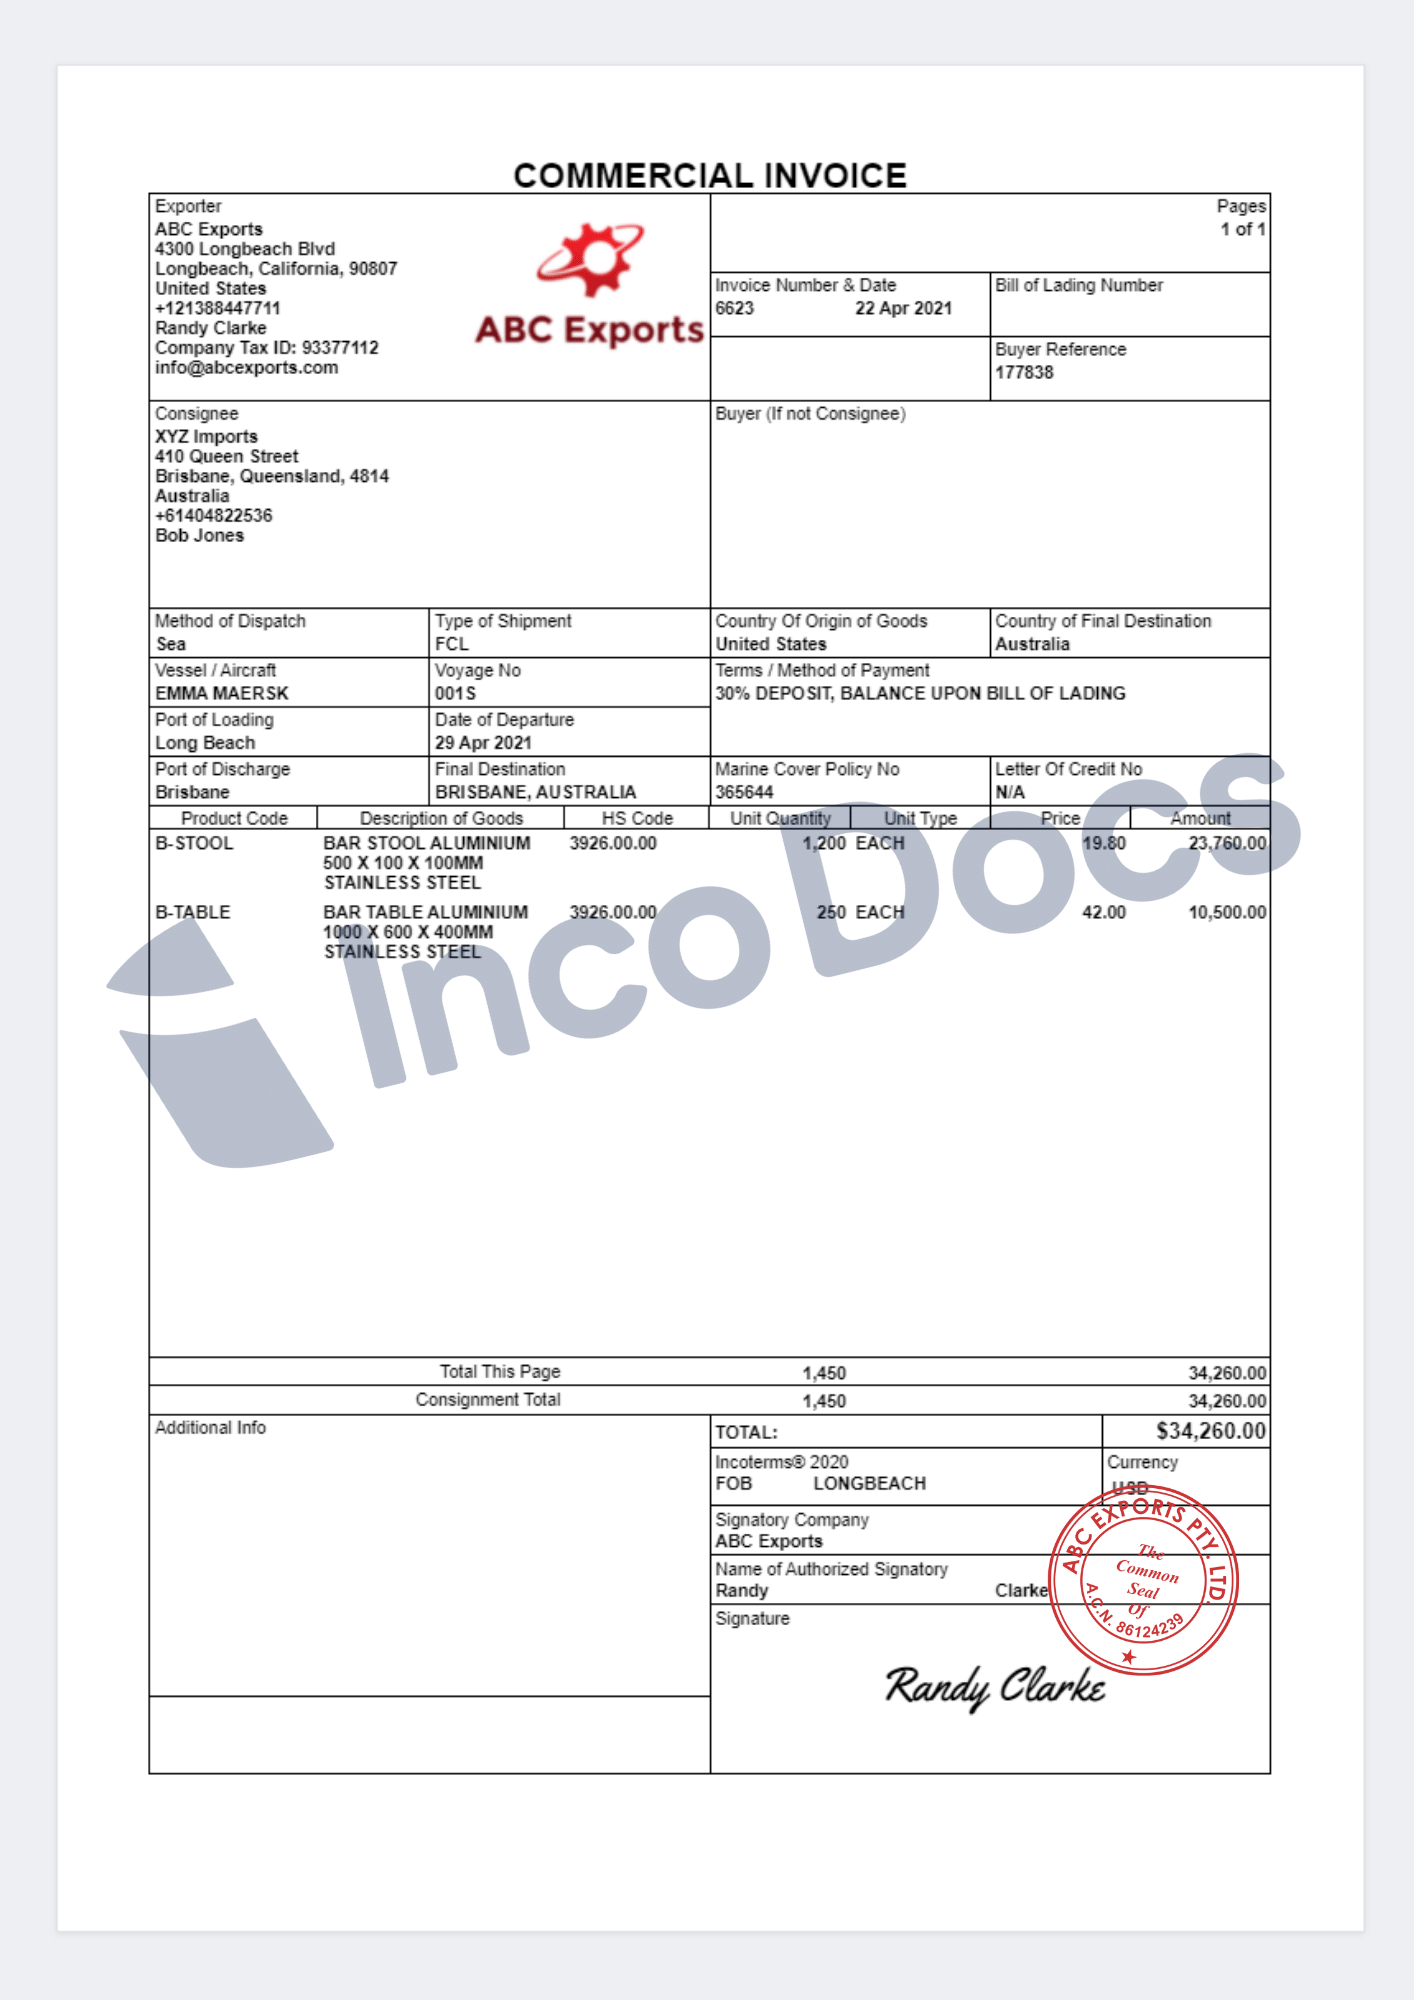 Commercial Invoice For Export